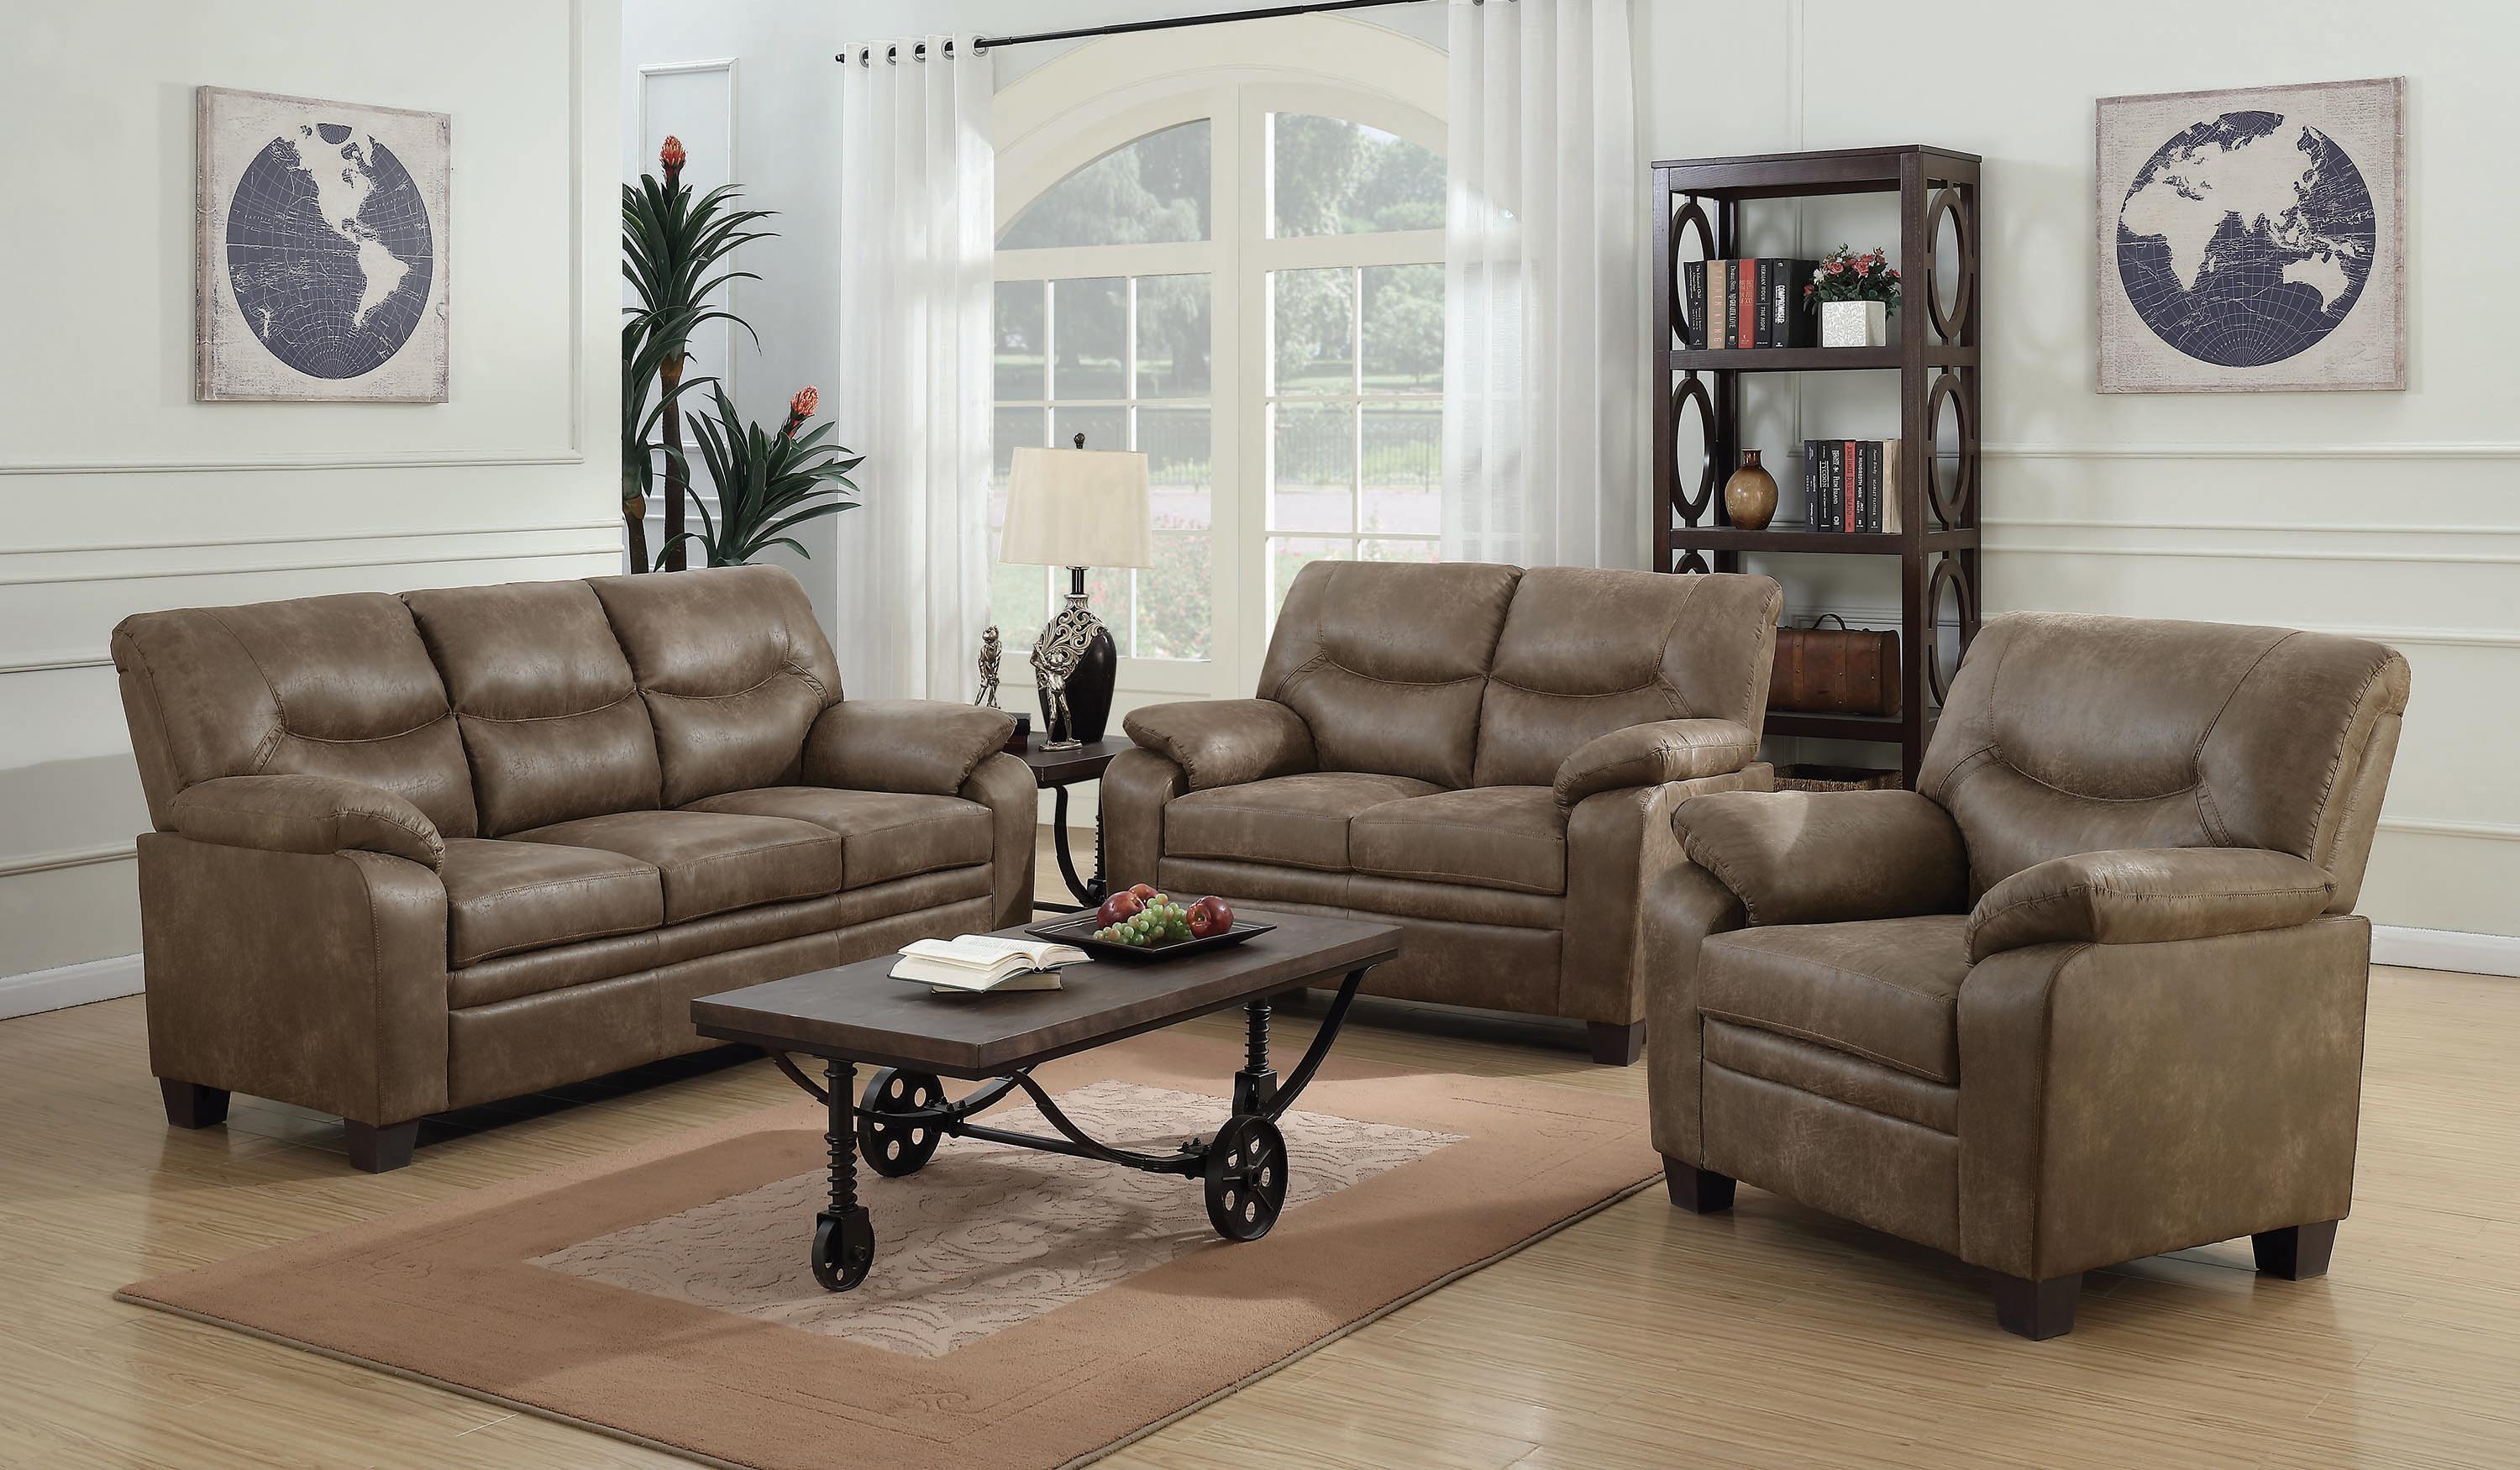 

                    
Coaster 506562 Meagan Loveseat Brown Coated Microfiber Purchase 
